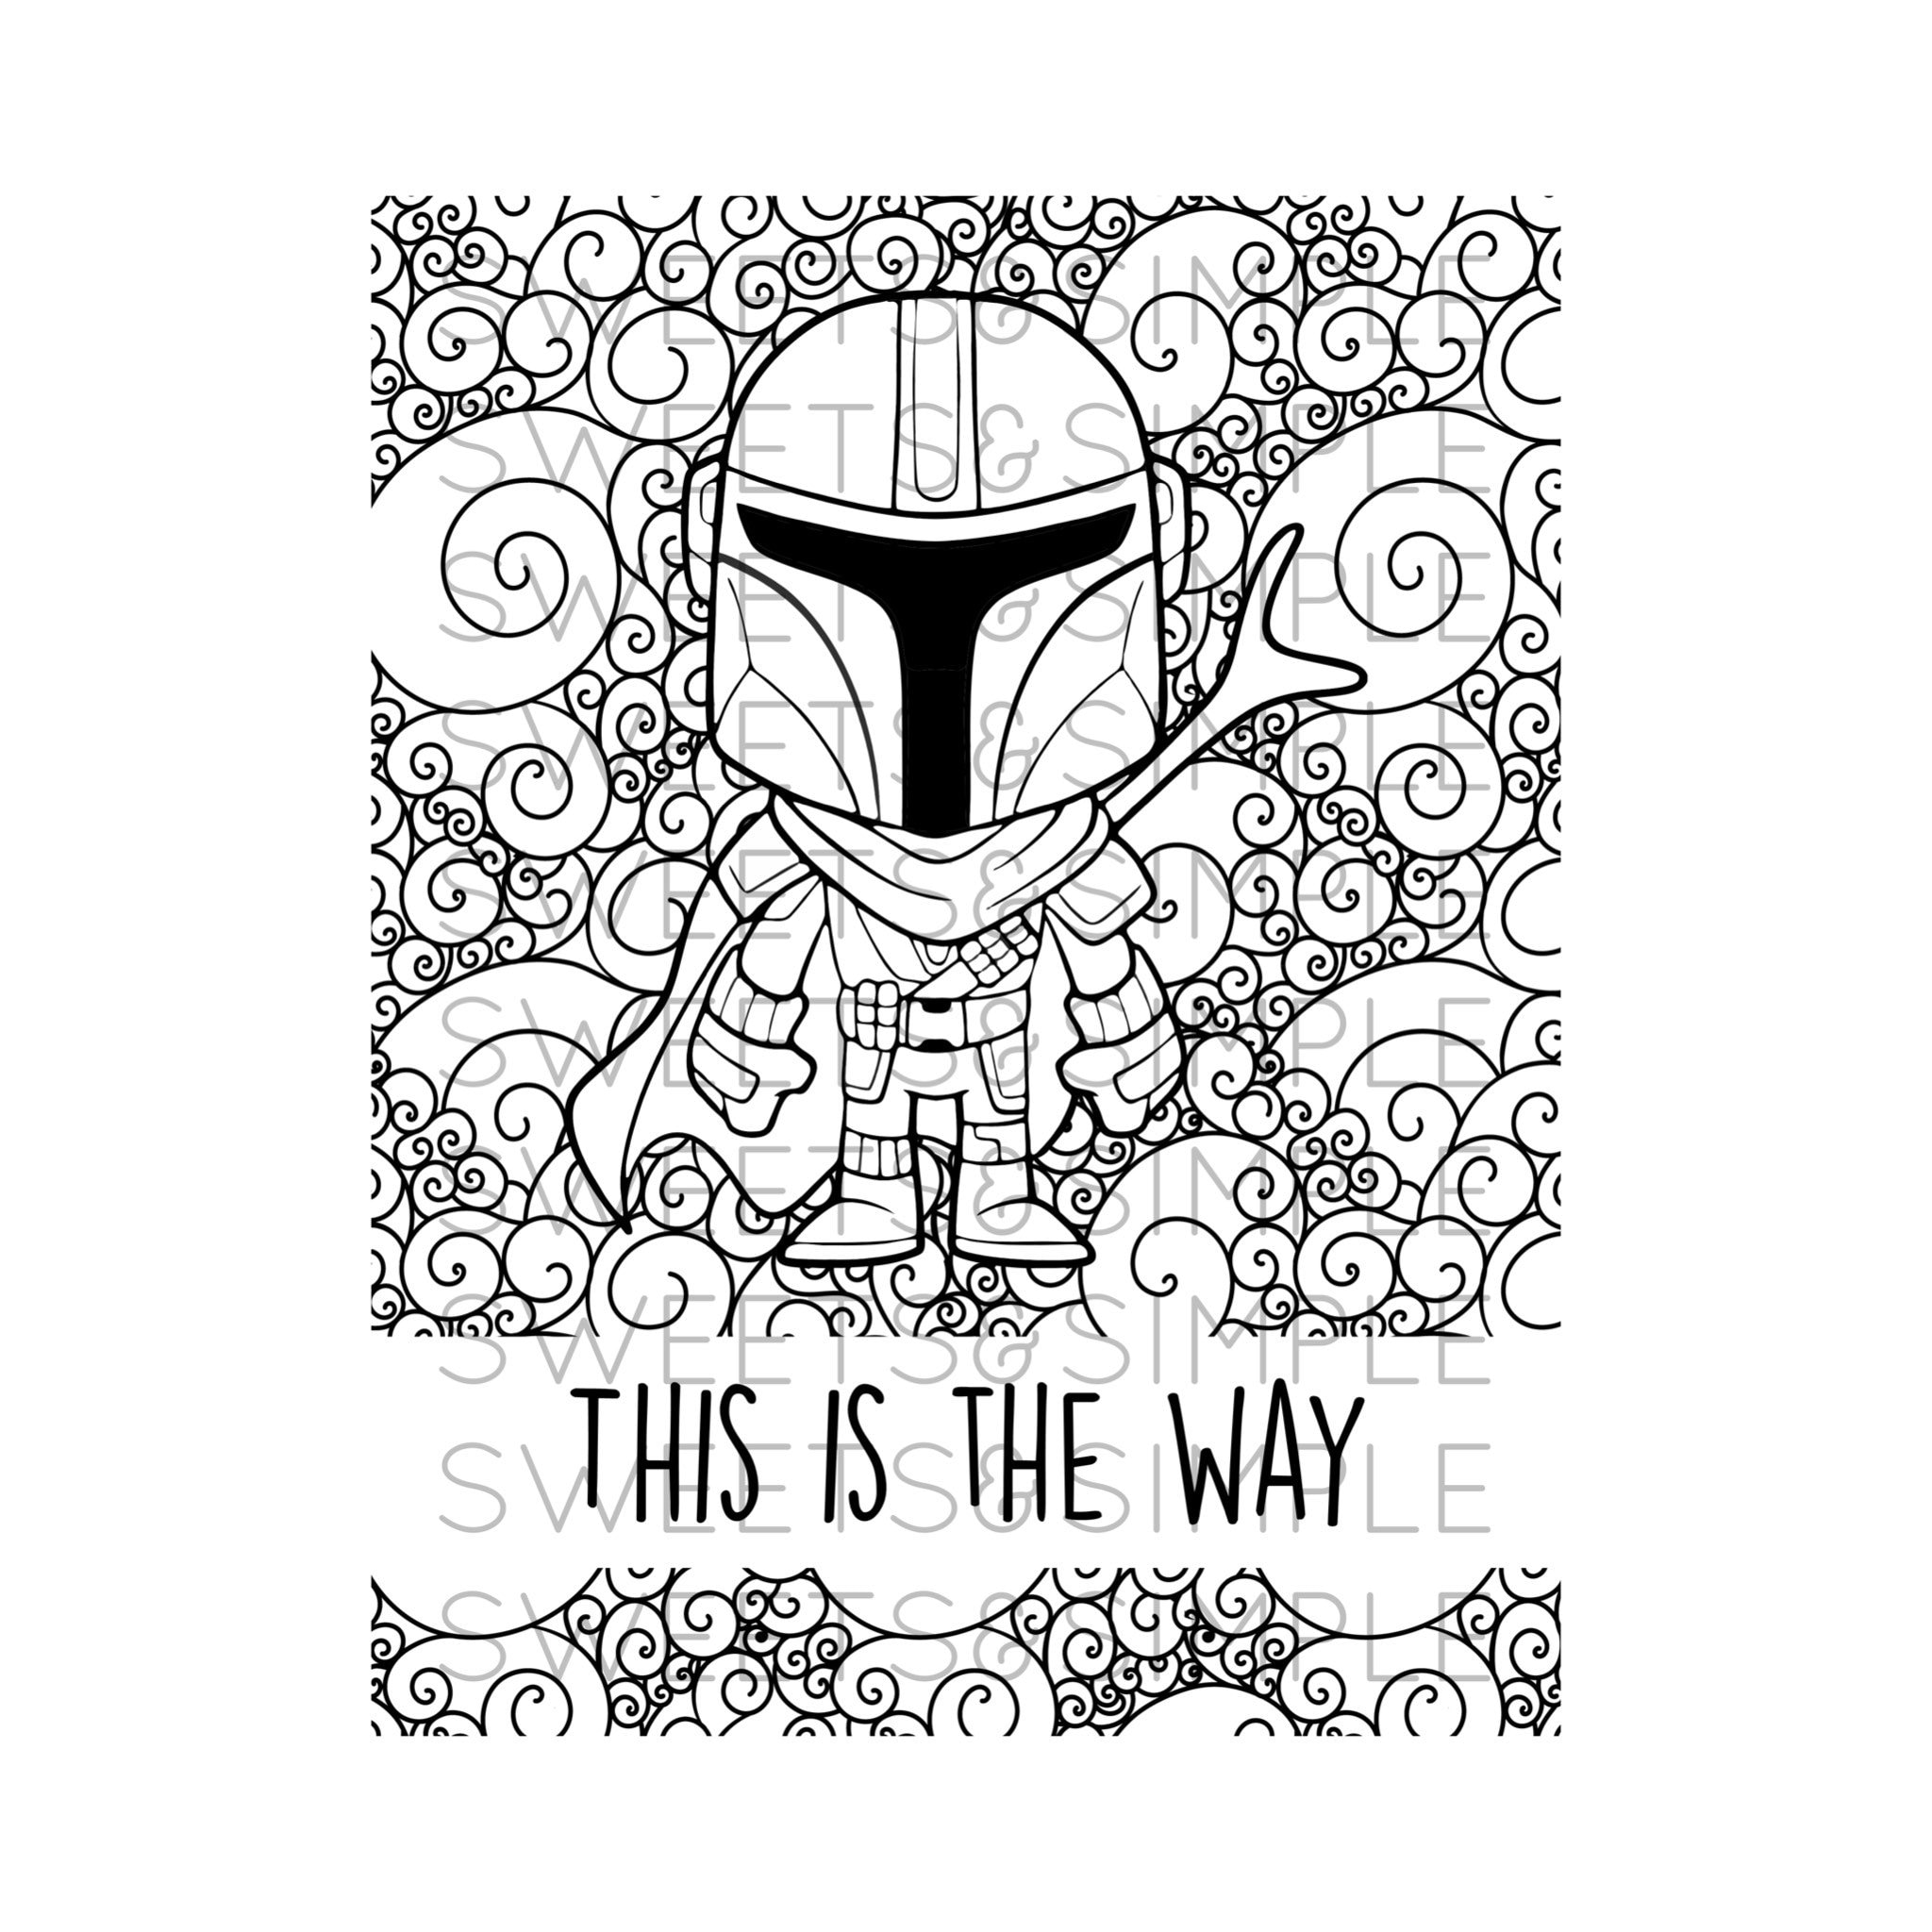 Space bounty hunter coloring page adult coloring coloring page coloring sheet instant download printable